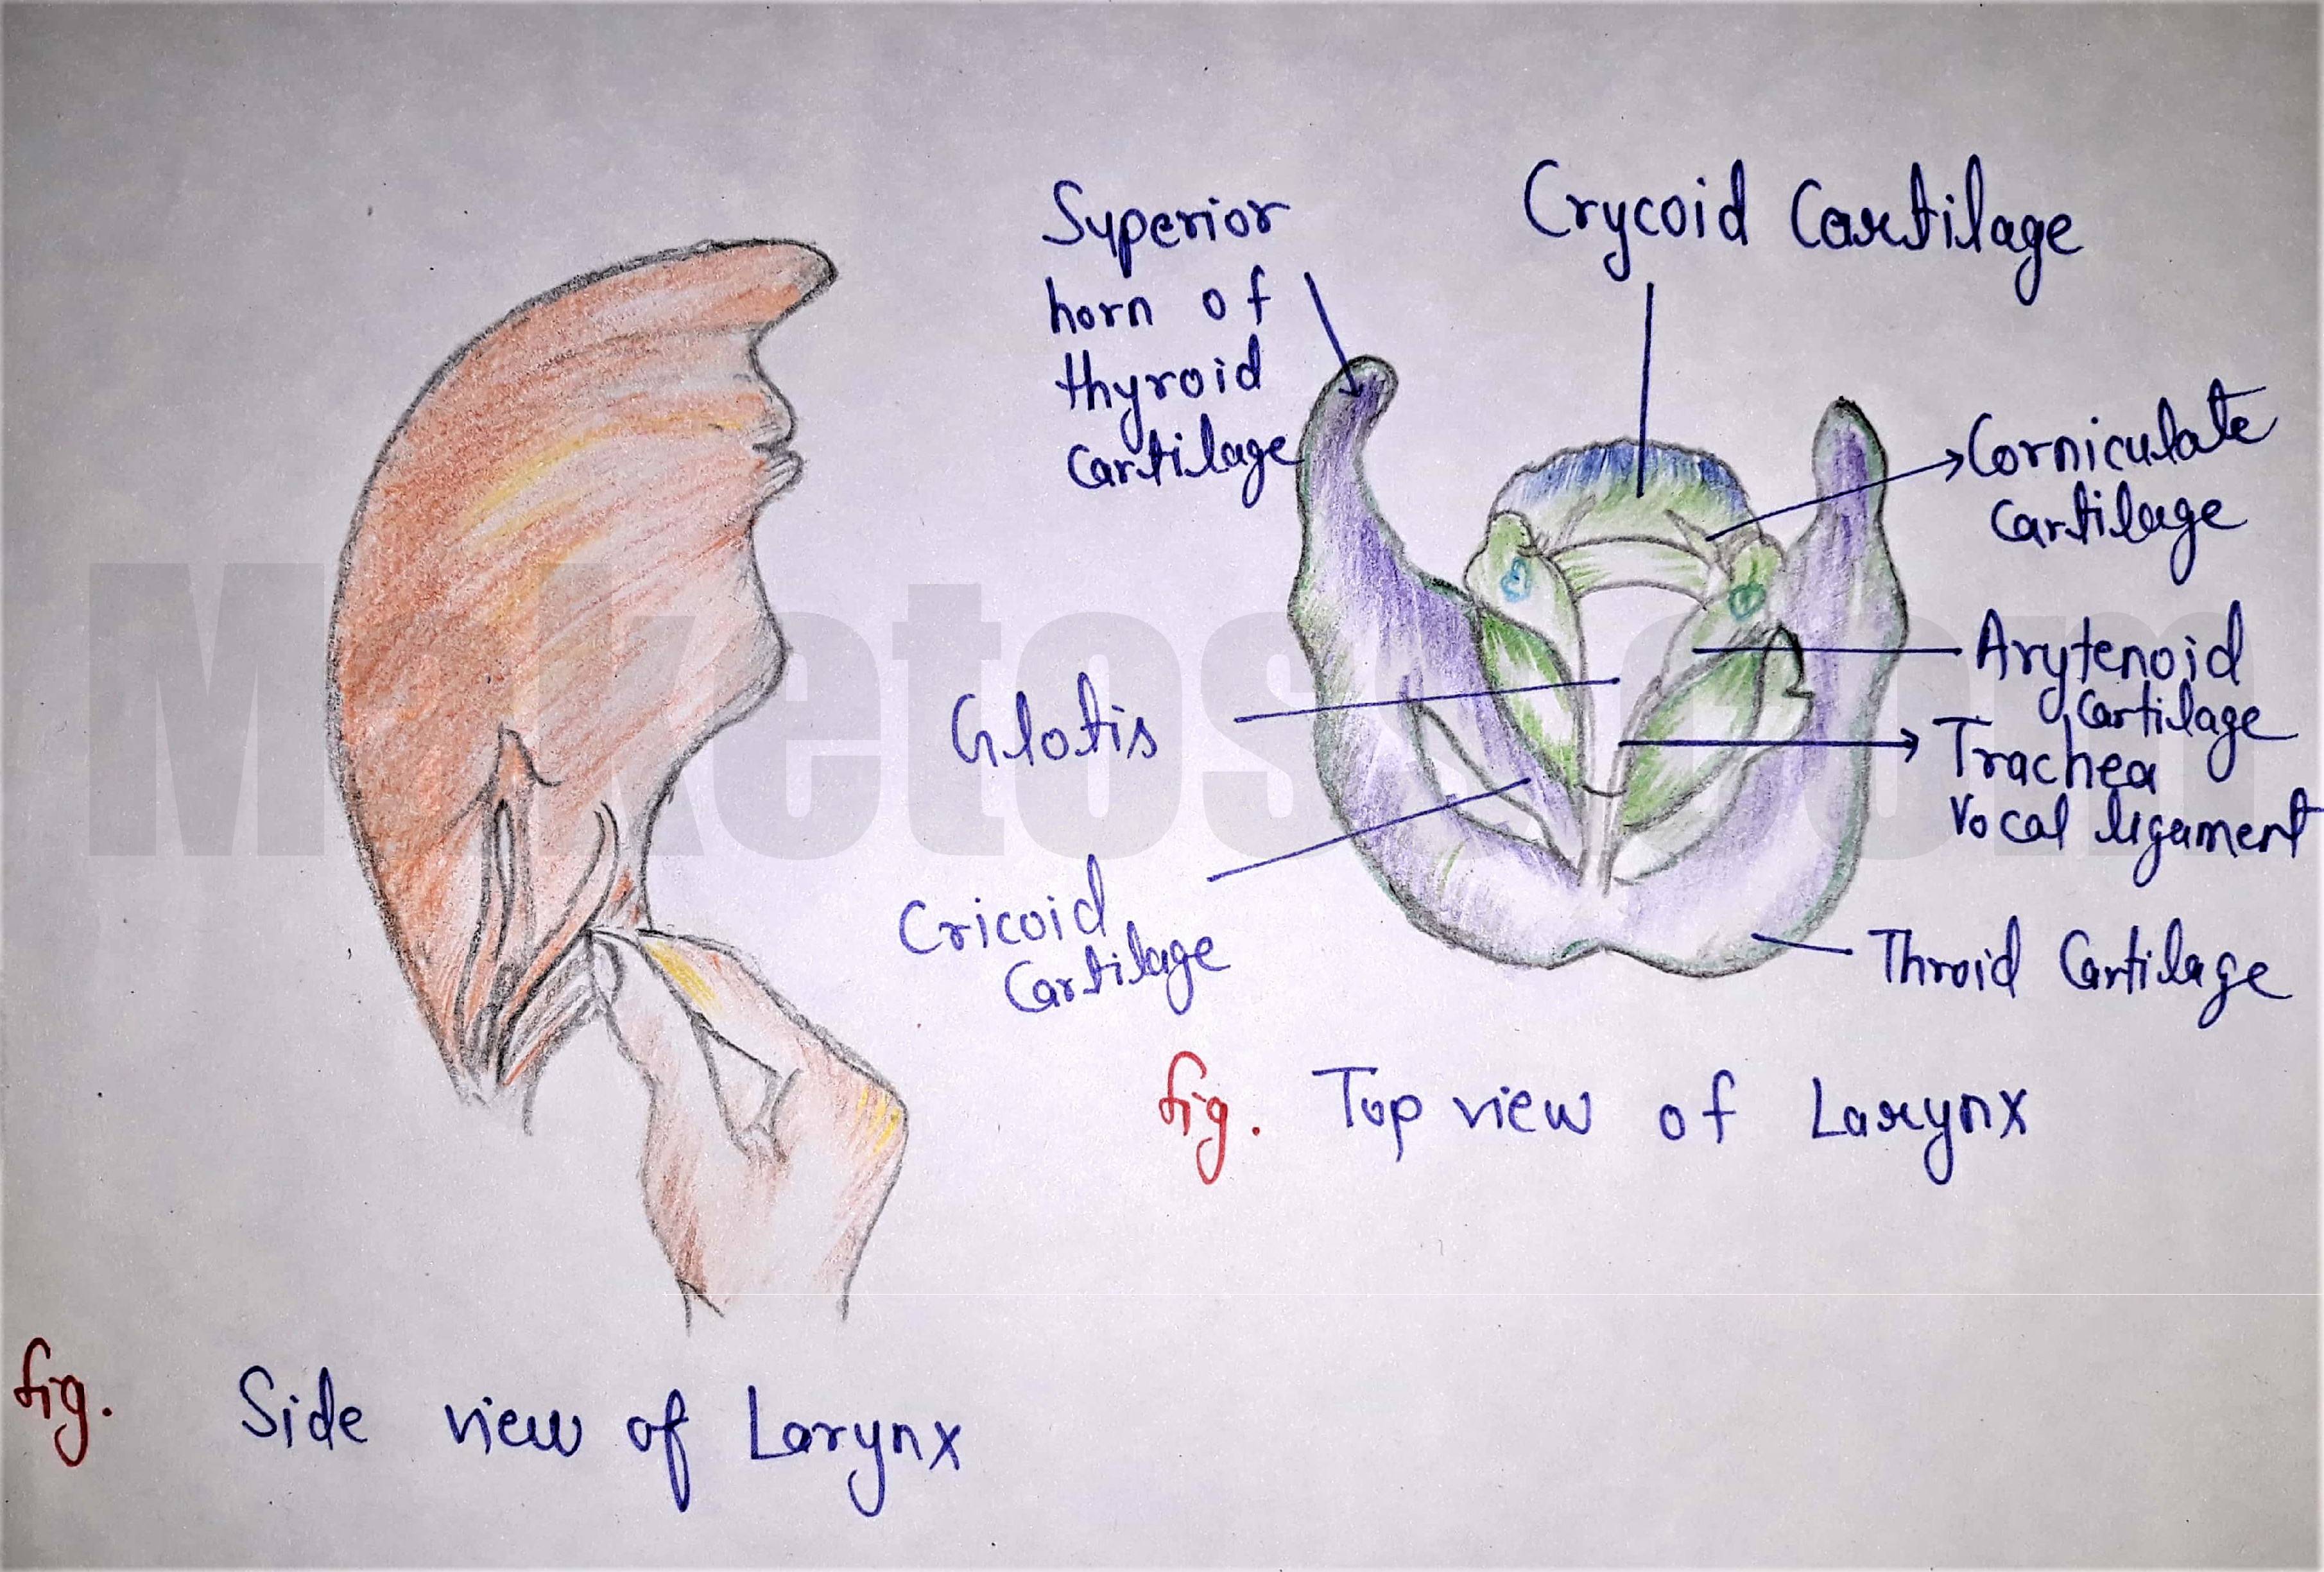 Sketch larynx and explain its functions in your own words